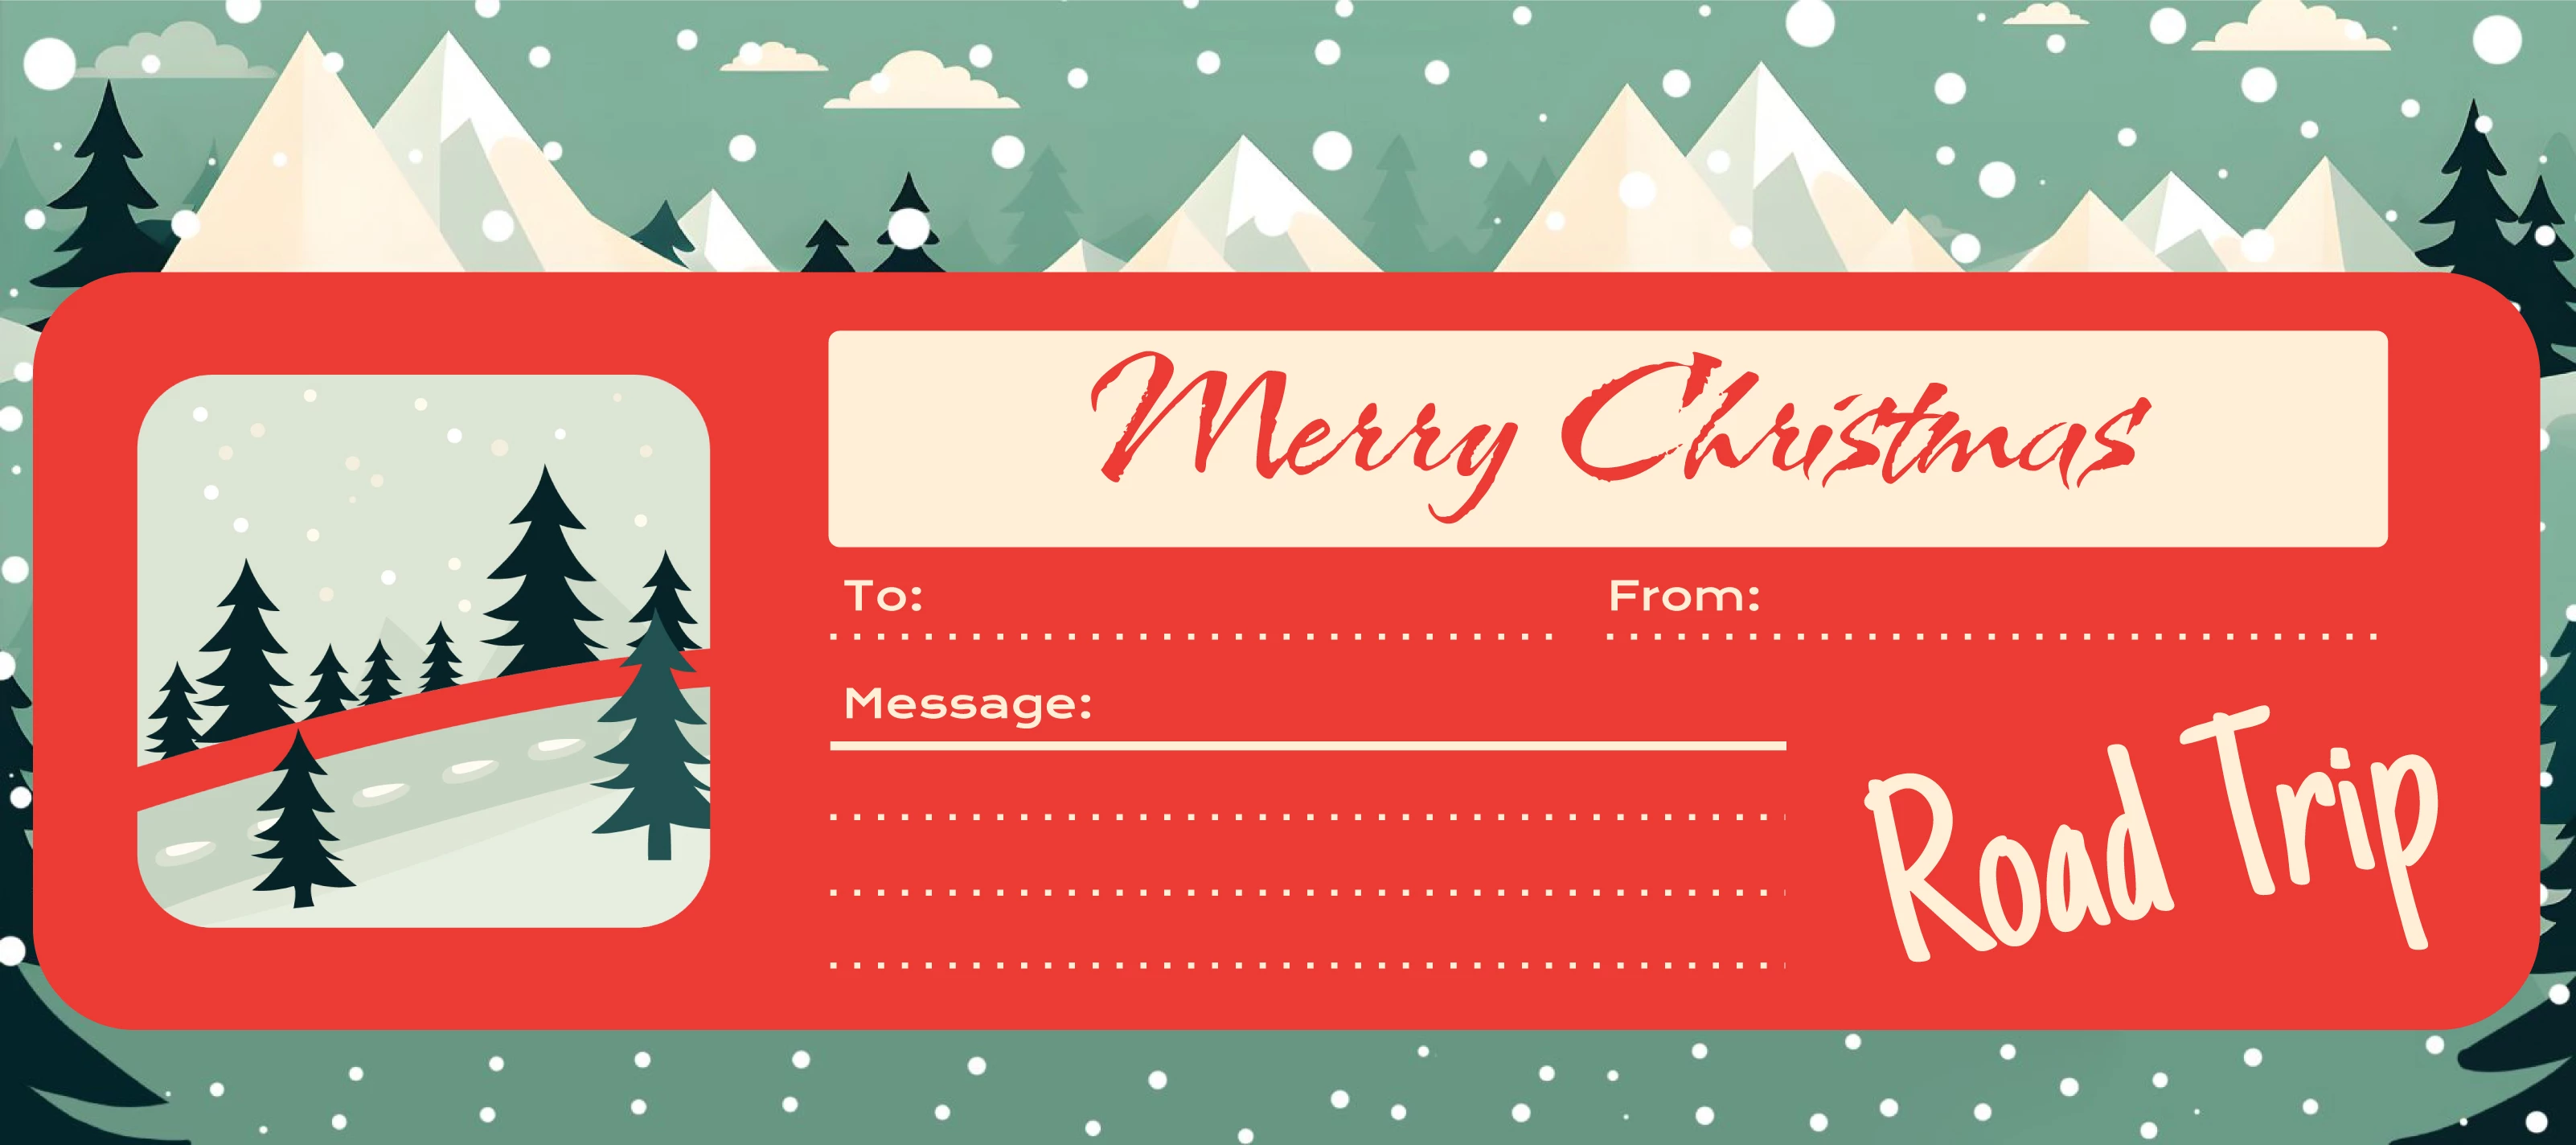 Free Holiday Gift Certificates Templates to Print